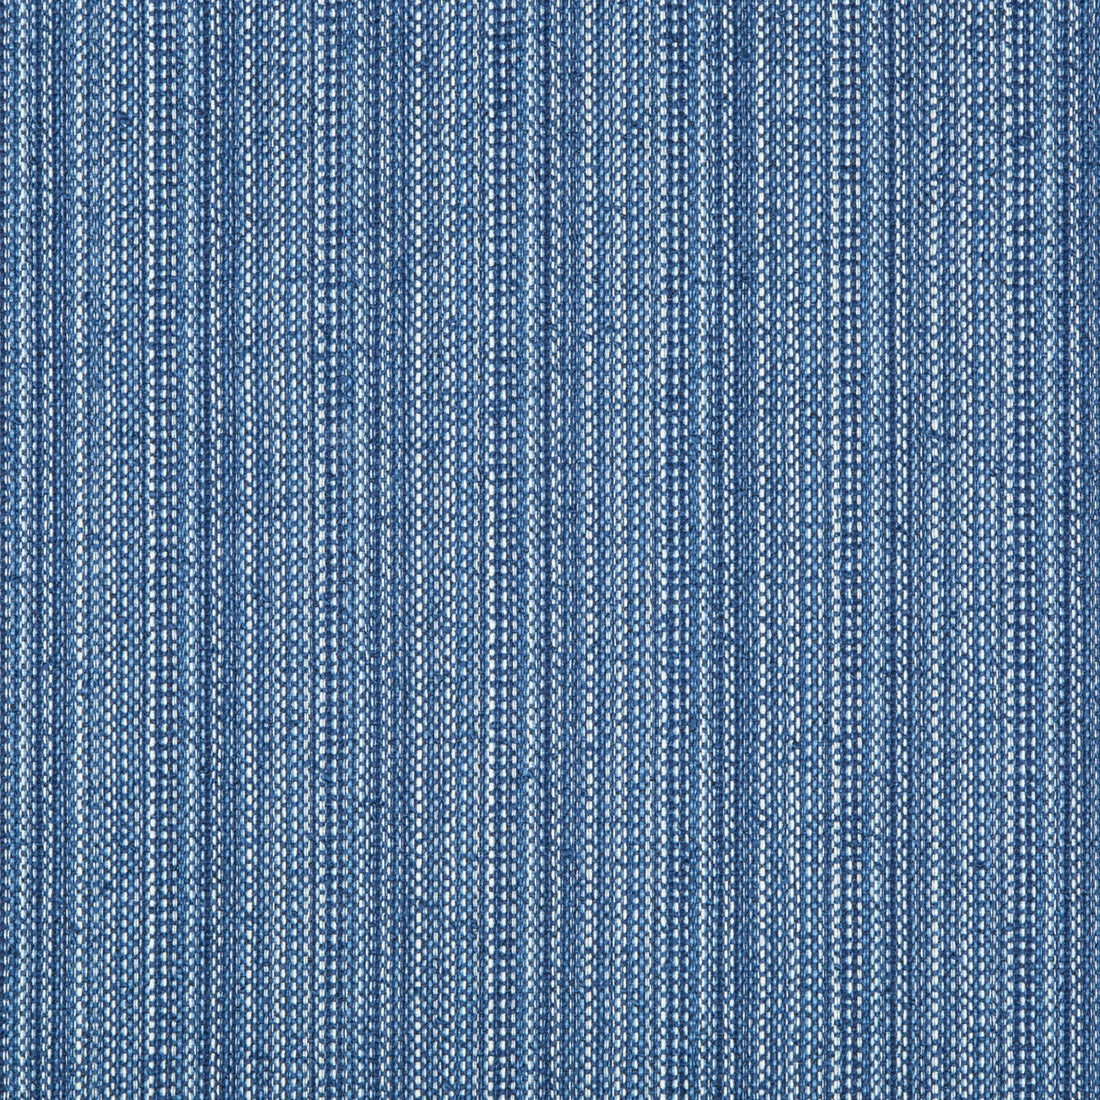 Cruiser Strie fabric in cobalt color - pattern 34499.515.0 - by Kravet Design in the Echo Indoor Outdoor Ibiza collection